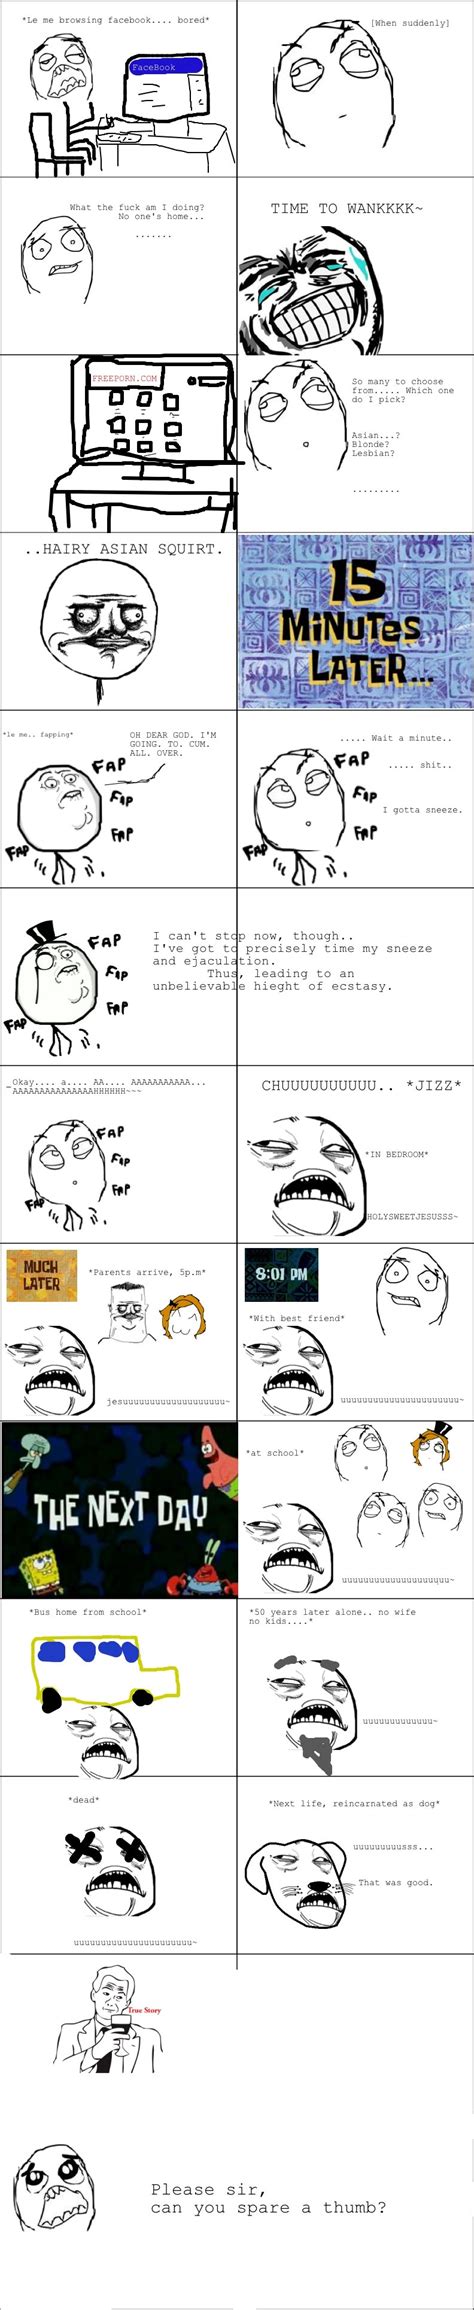 like a sir rage comics best cartoons and various comics translated into english most